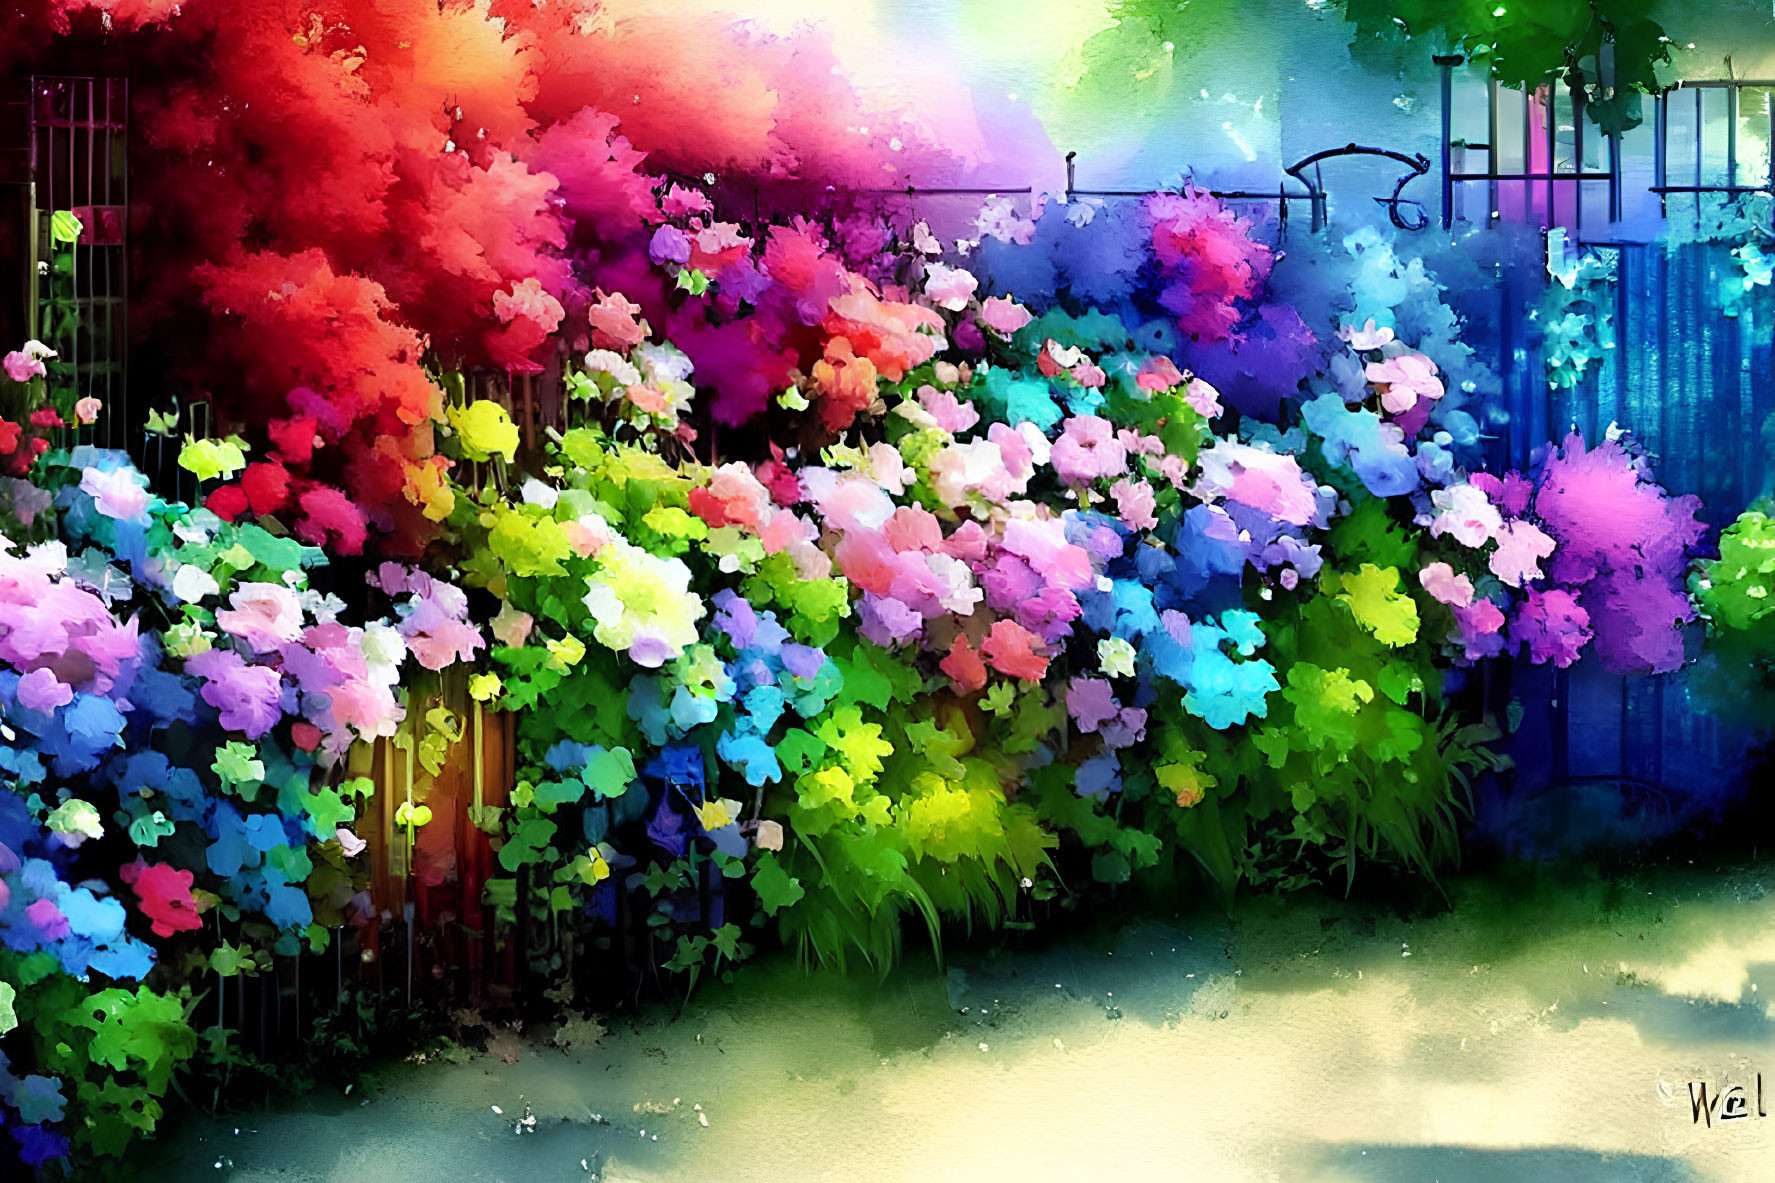 Colorful Garden Digital Painting with Vibrant Flowers and Watercolor Texture